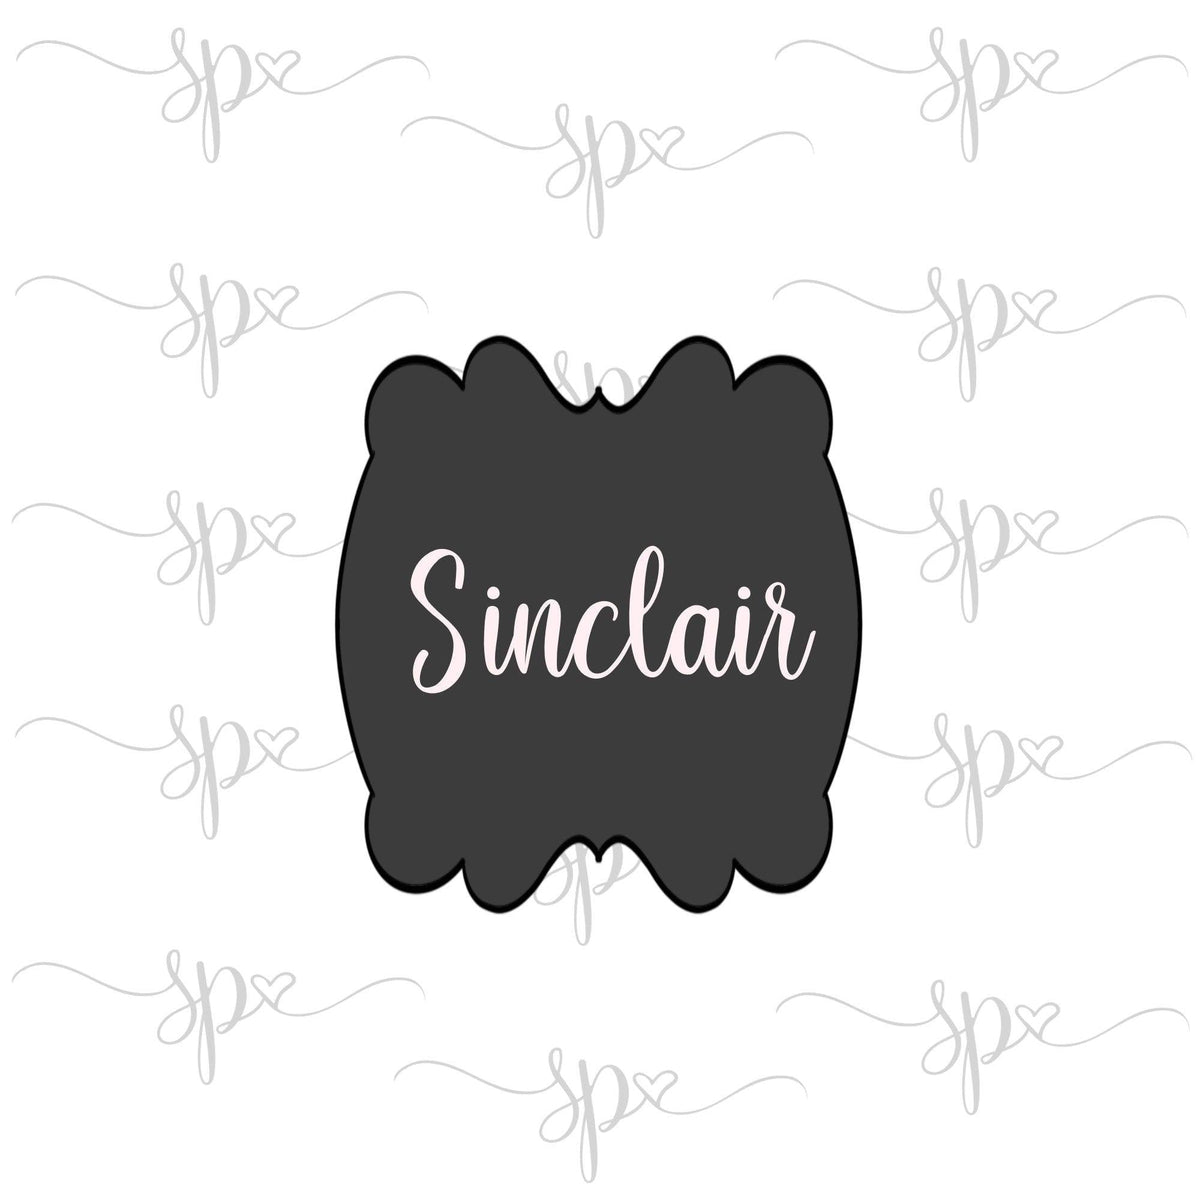 Sinclair Plaque Cookie Cutter - Sweetleigh 